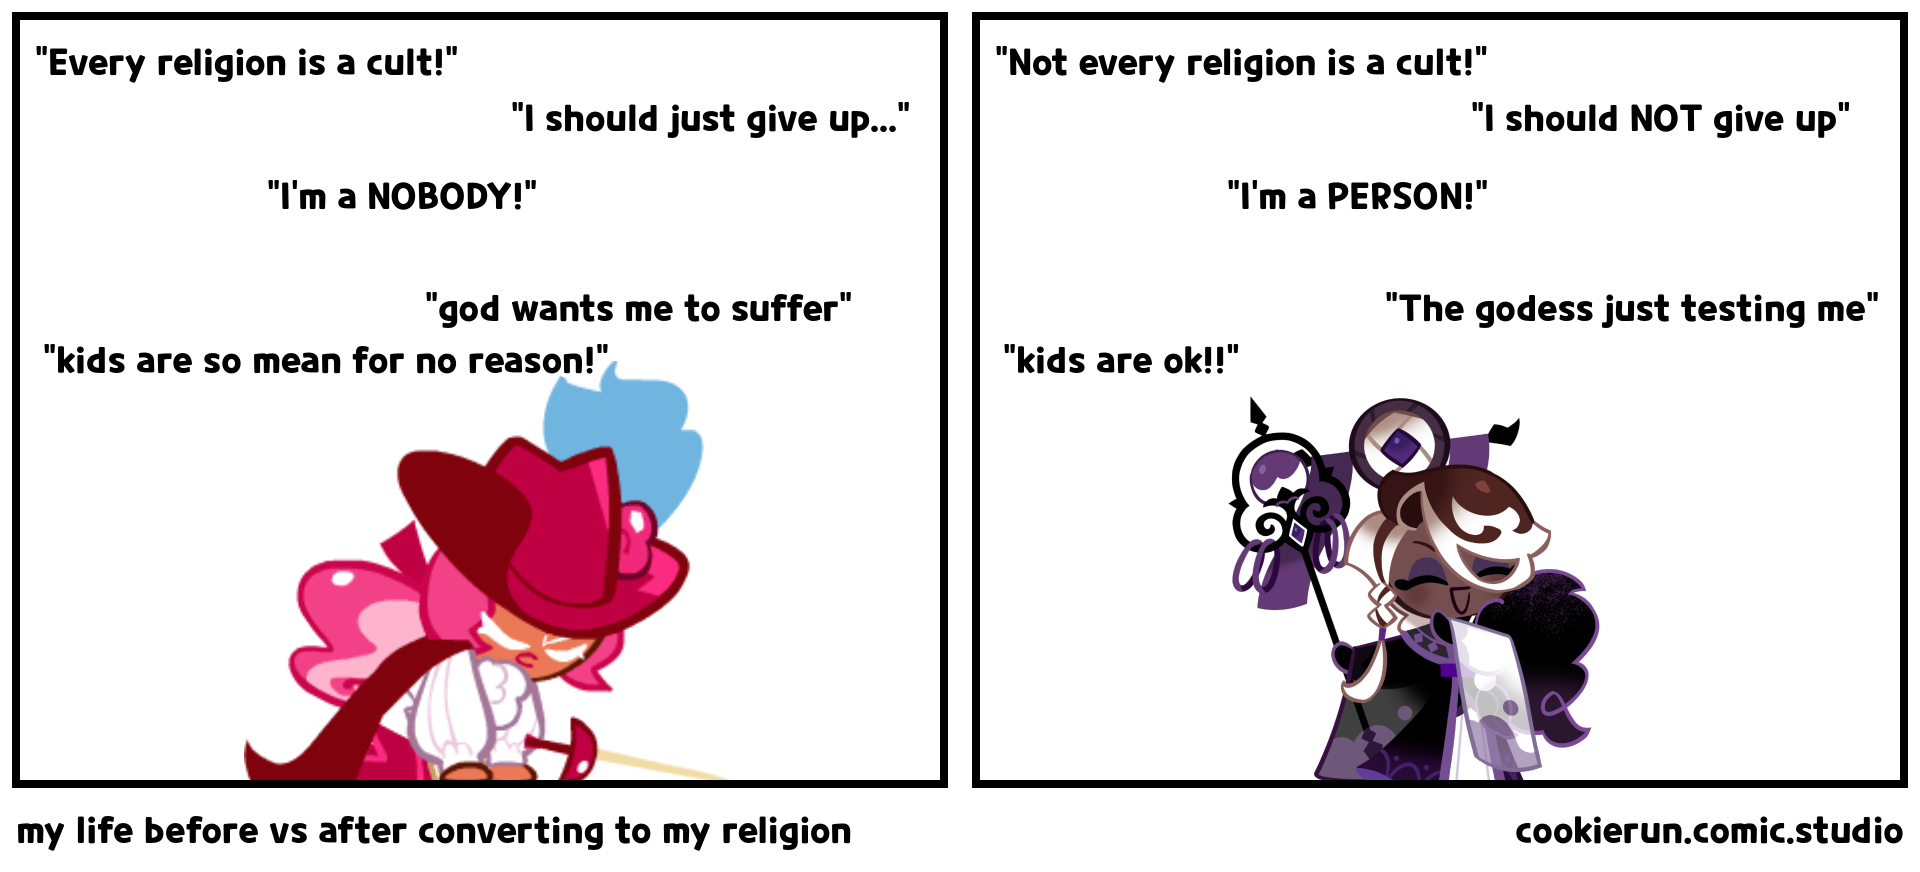 my life before vs after converting to my religion